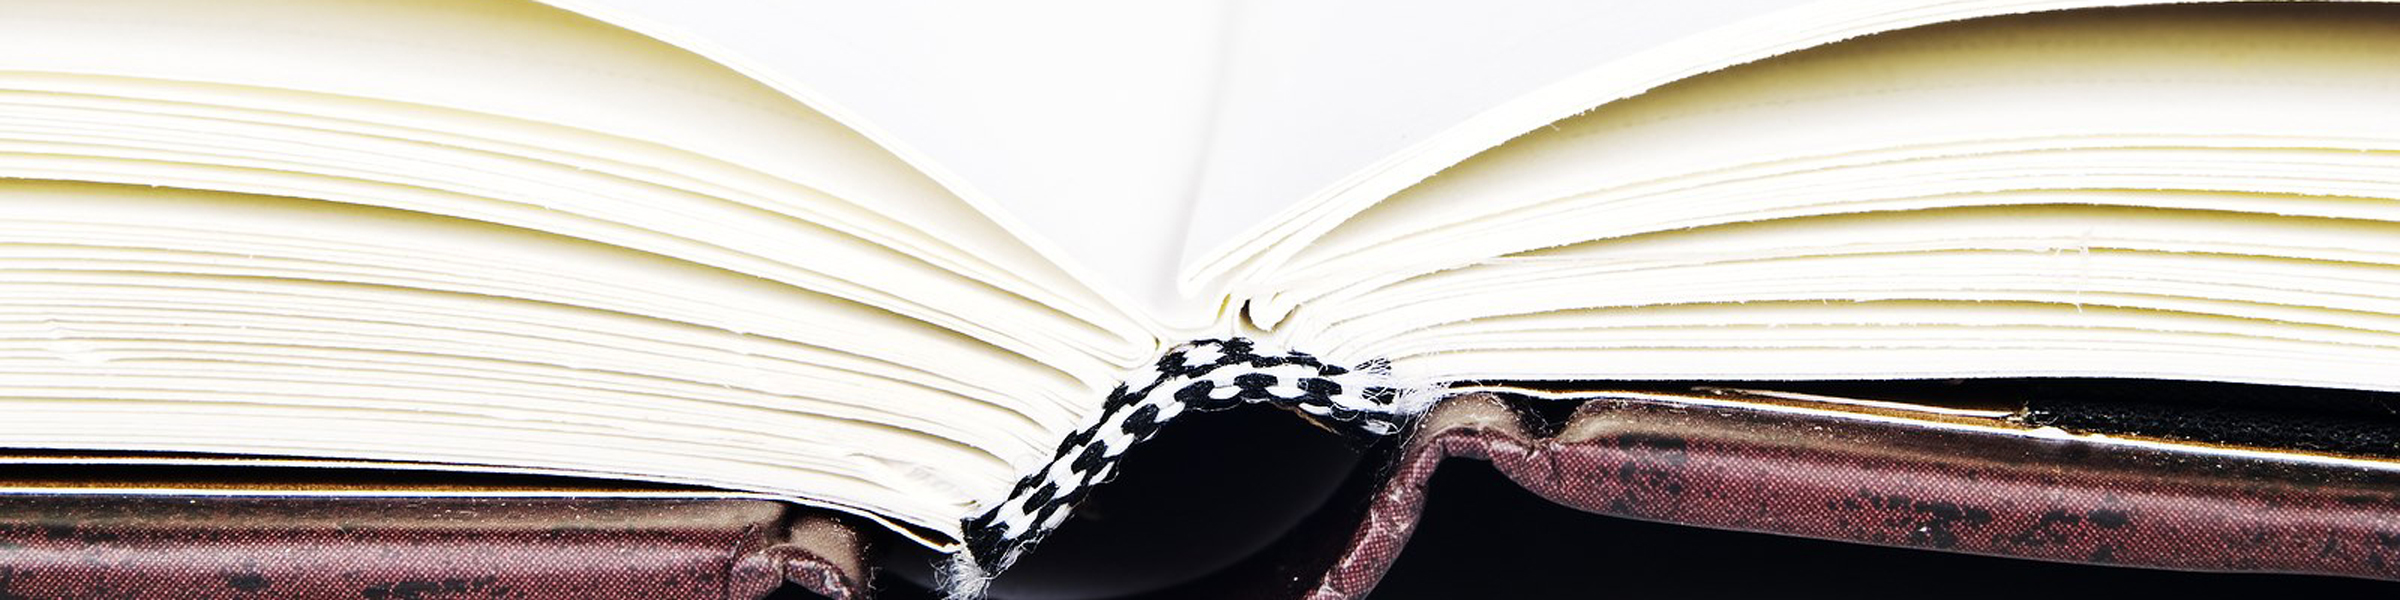 Closeup photo of an open book with blank pages